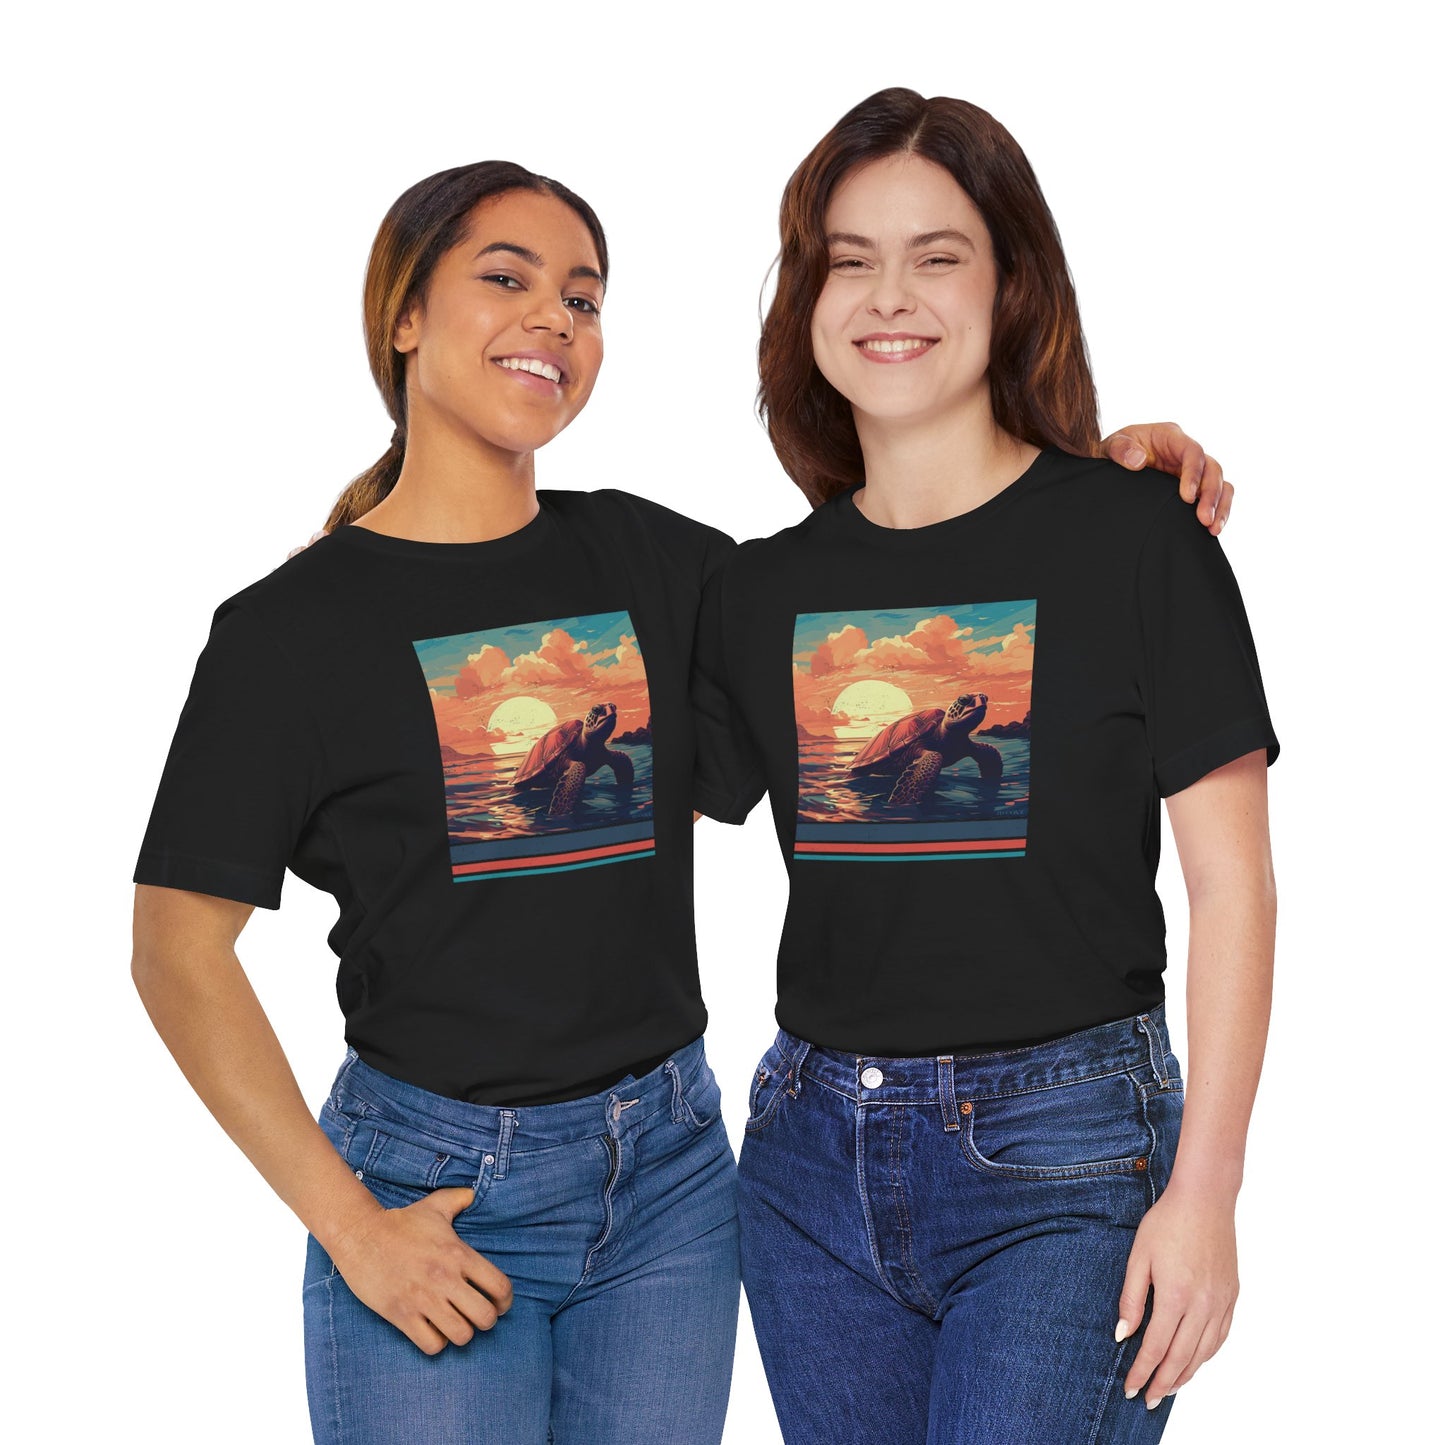 Sunset Turtle Graphic Tee - Unisex Eco-Friendly Cotton Shirt by JD Cove